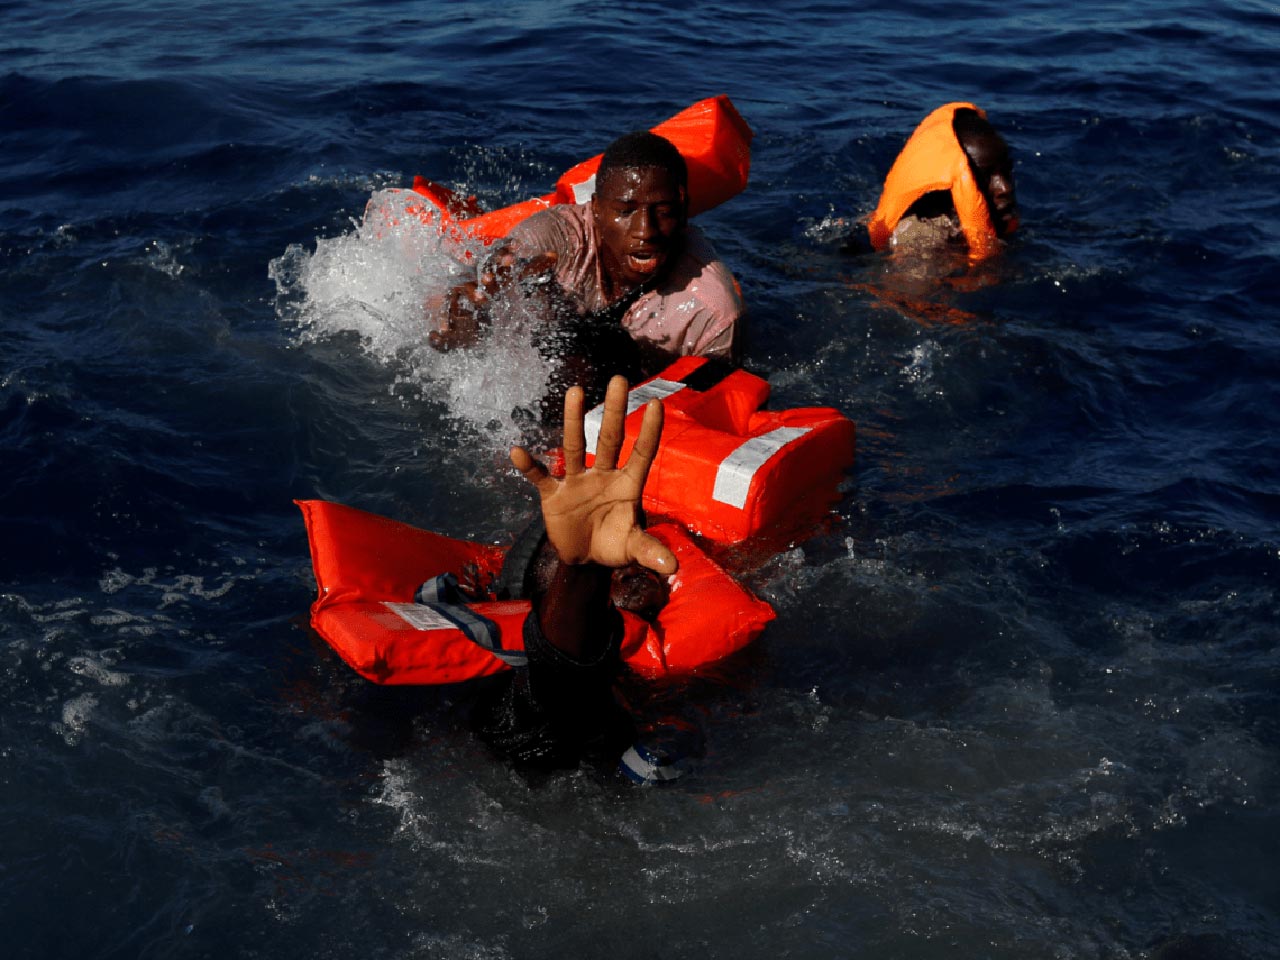 22 Photos From 2017 That Tell A Story: Migrants are trying to keep floating after their boat was capsized in the central Mediterranean during a rescue operation carried out by Non-governmental organization Migrant Offshore Aid Station.